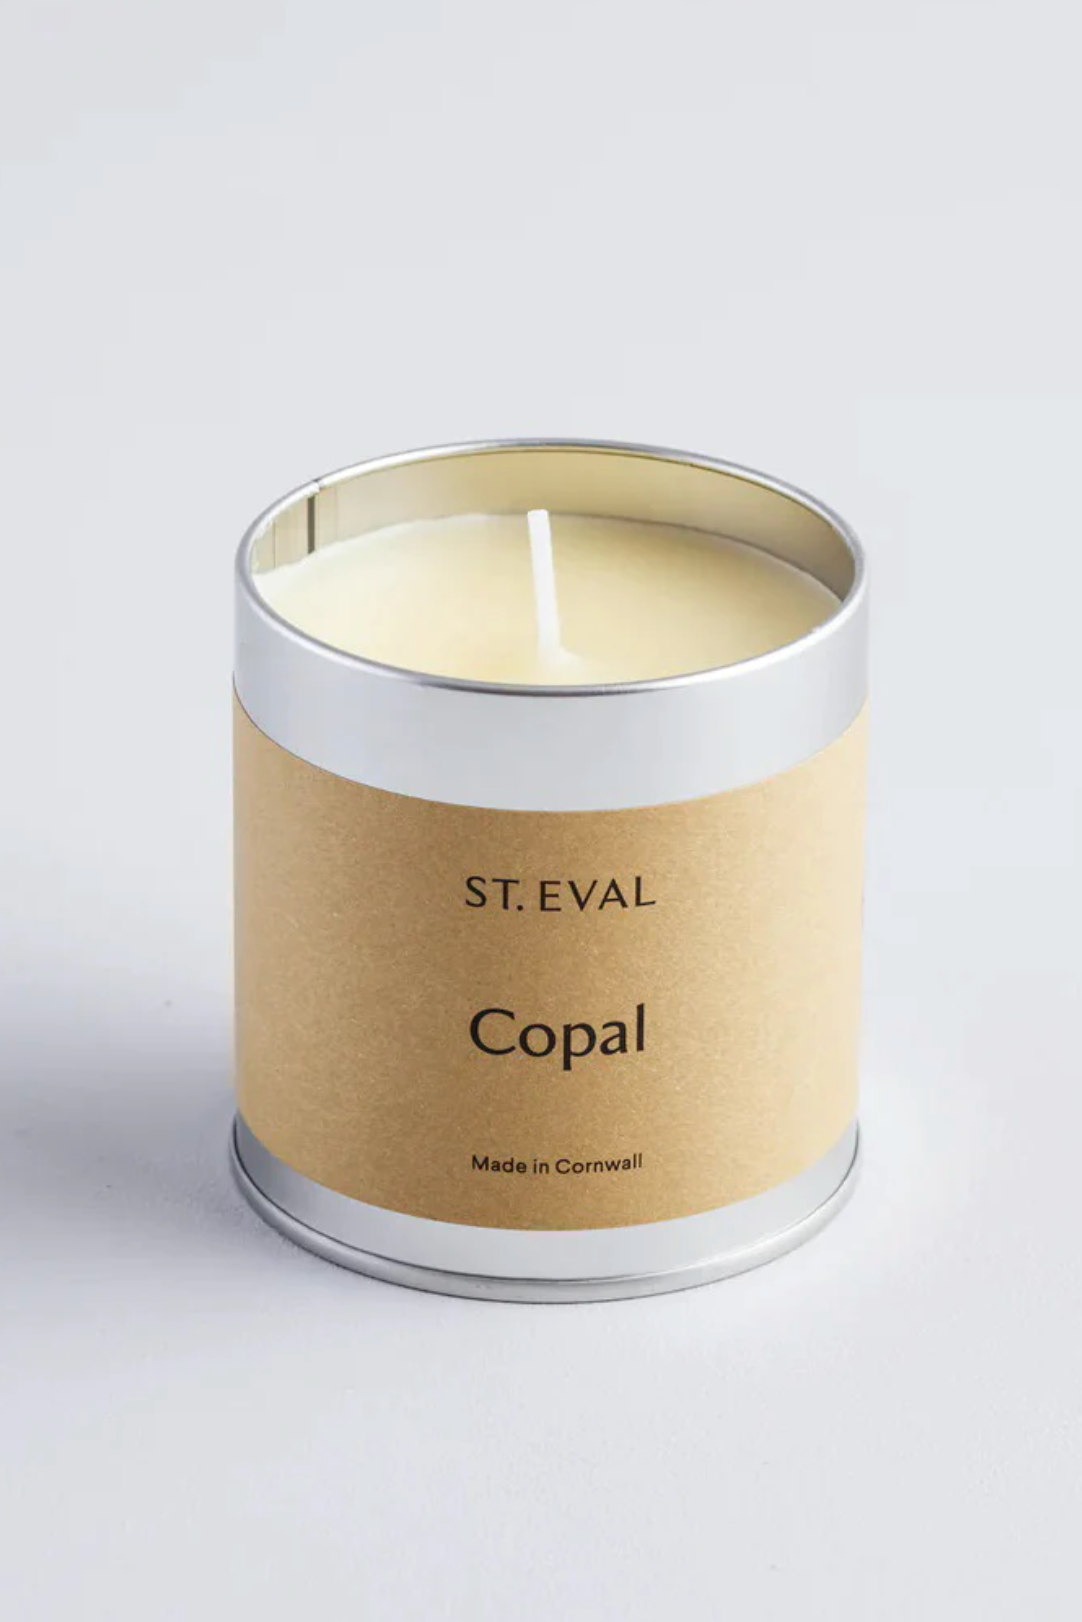 St Eval Copal Scented Tin Candle